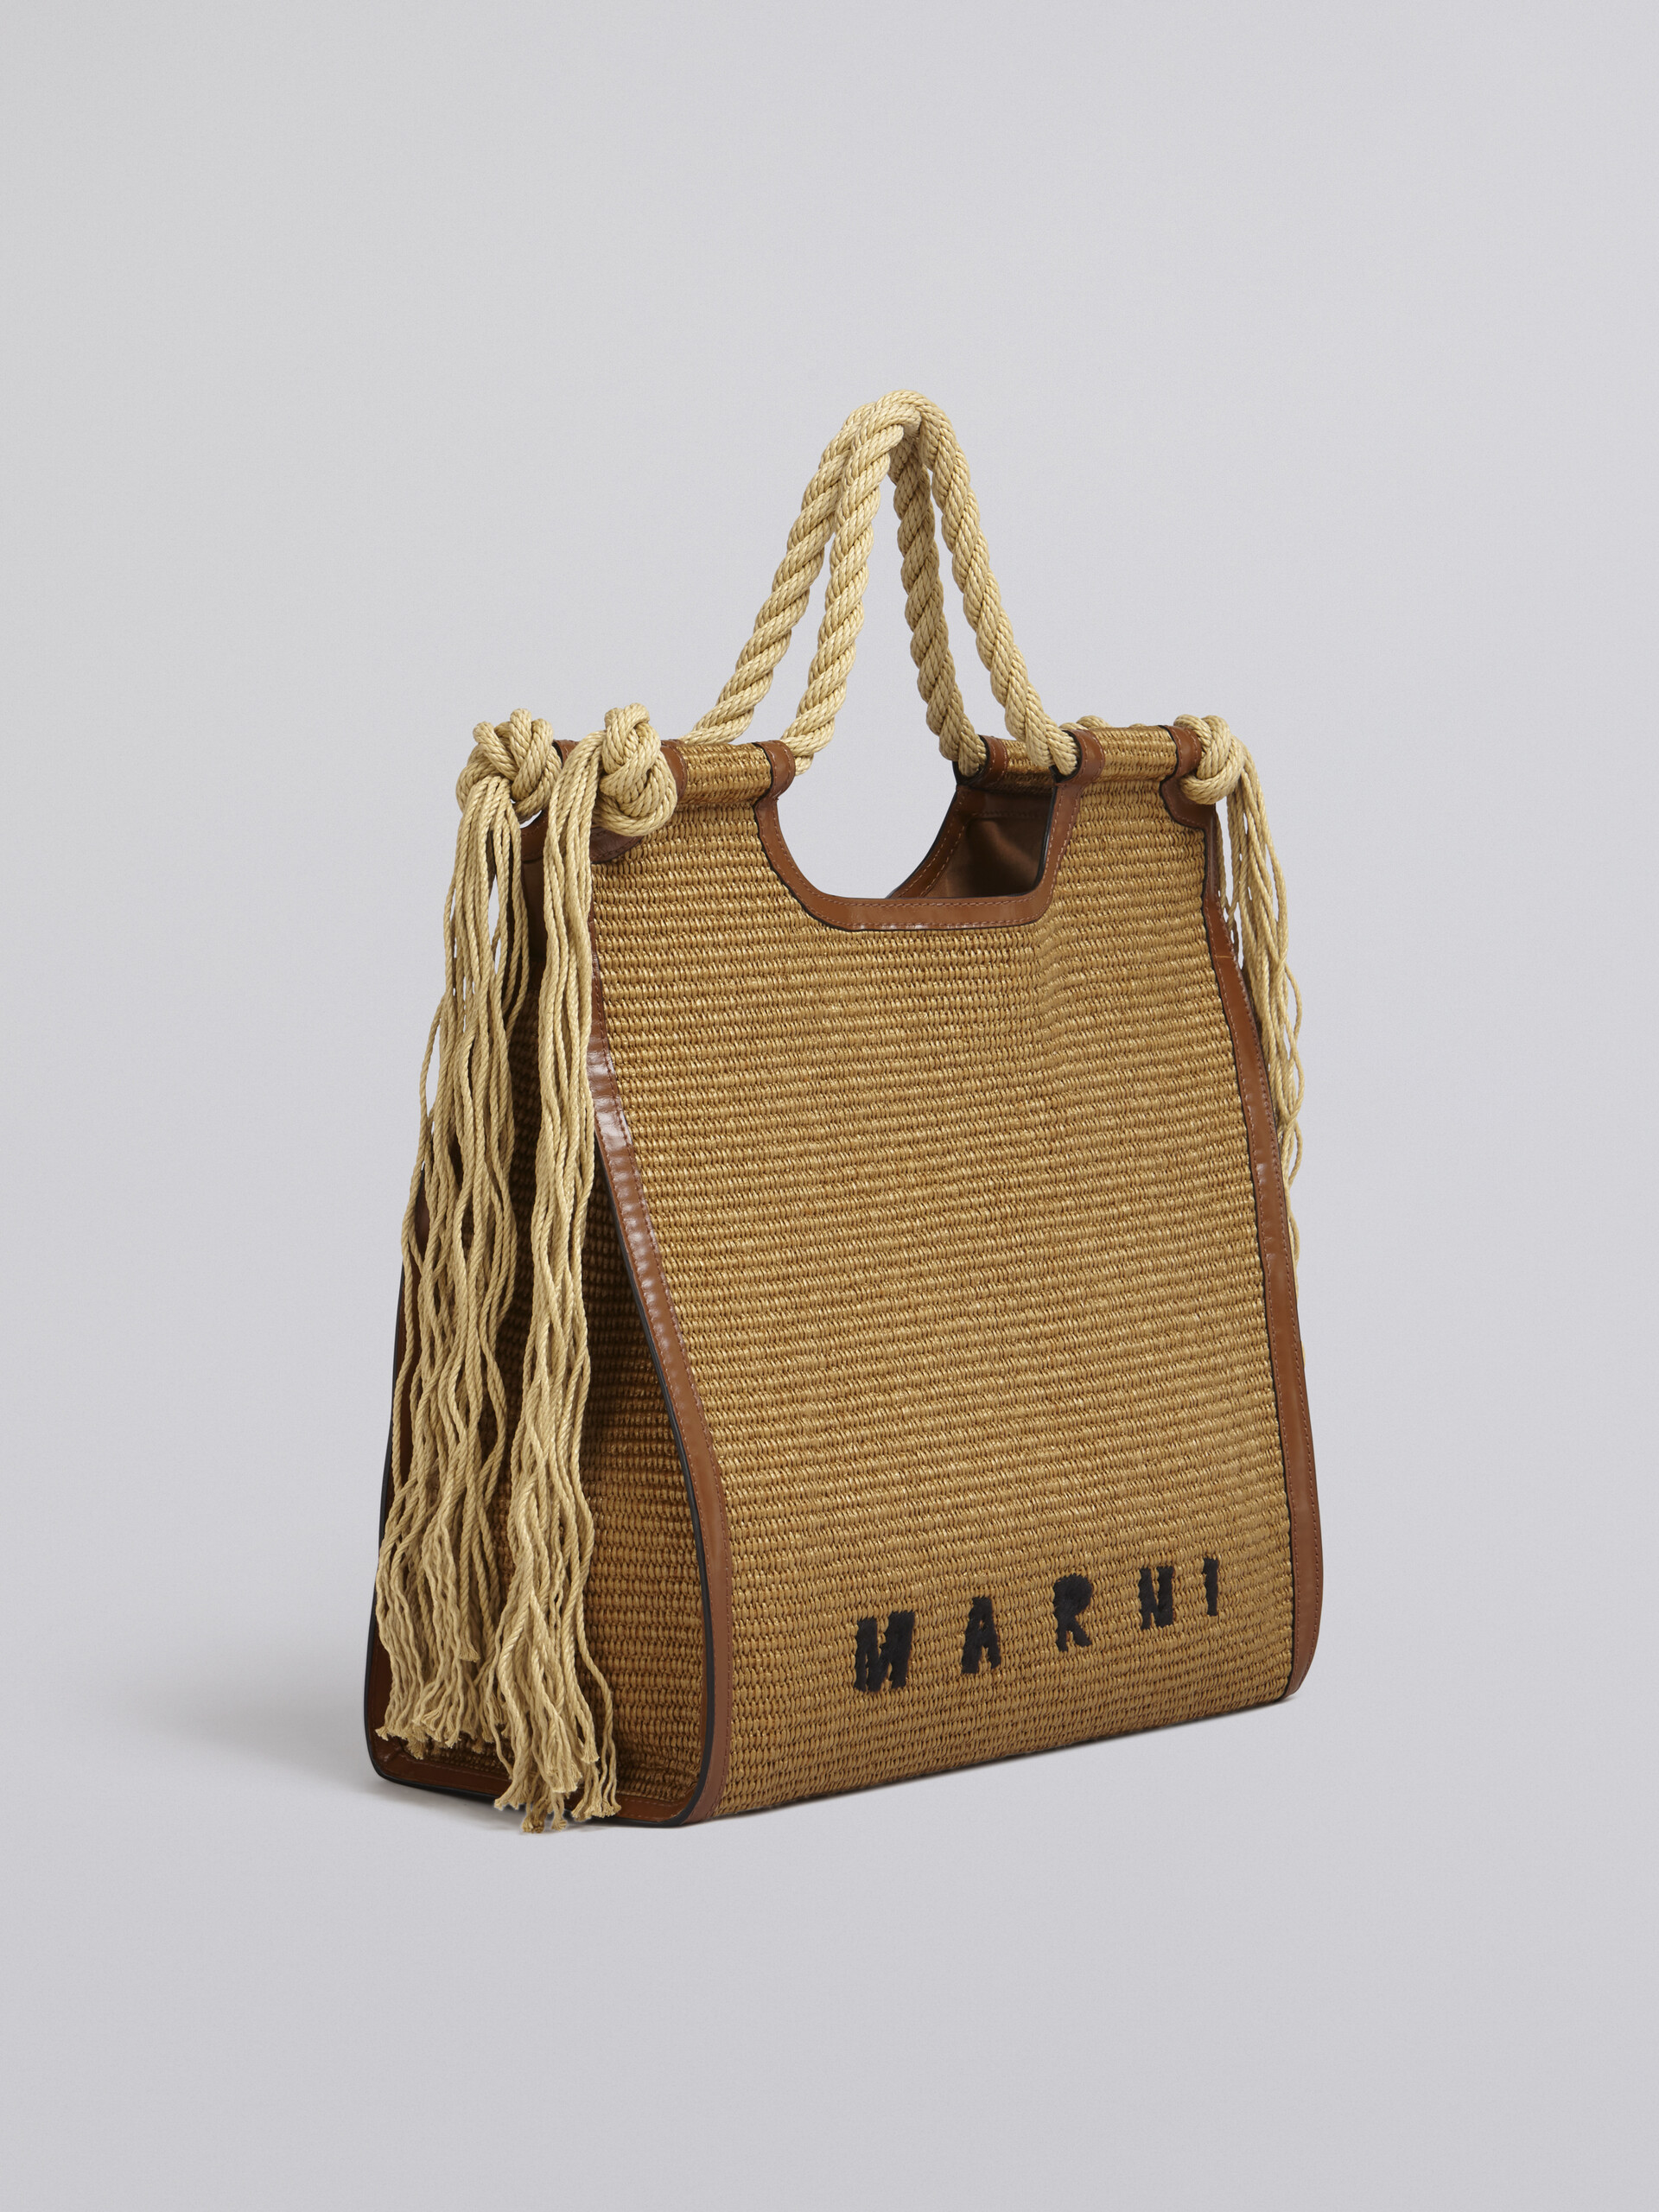 Marcel summer bag in brown leather and raffia with rope handles - Handbag - Image 5